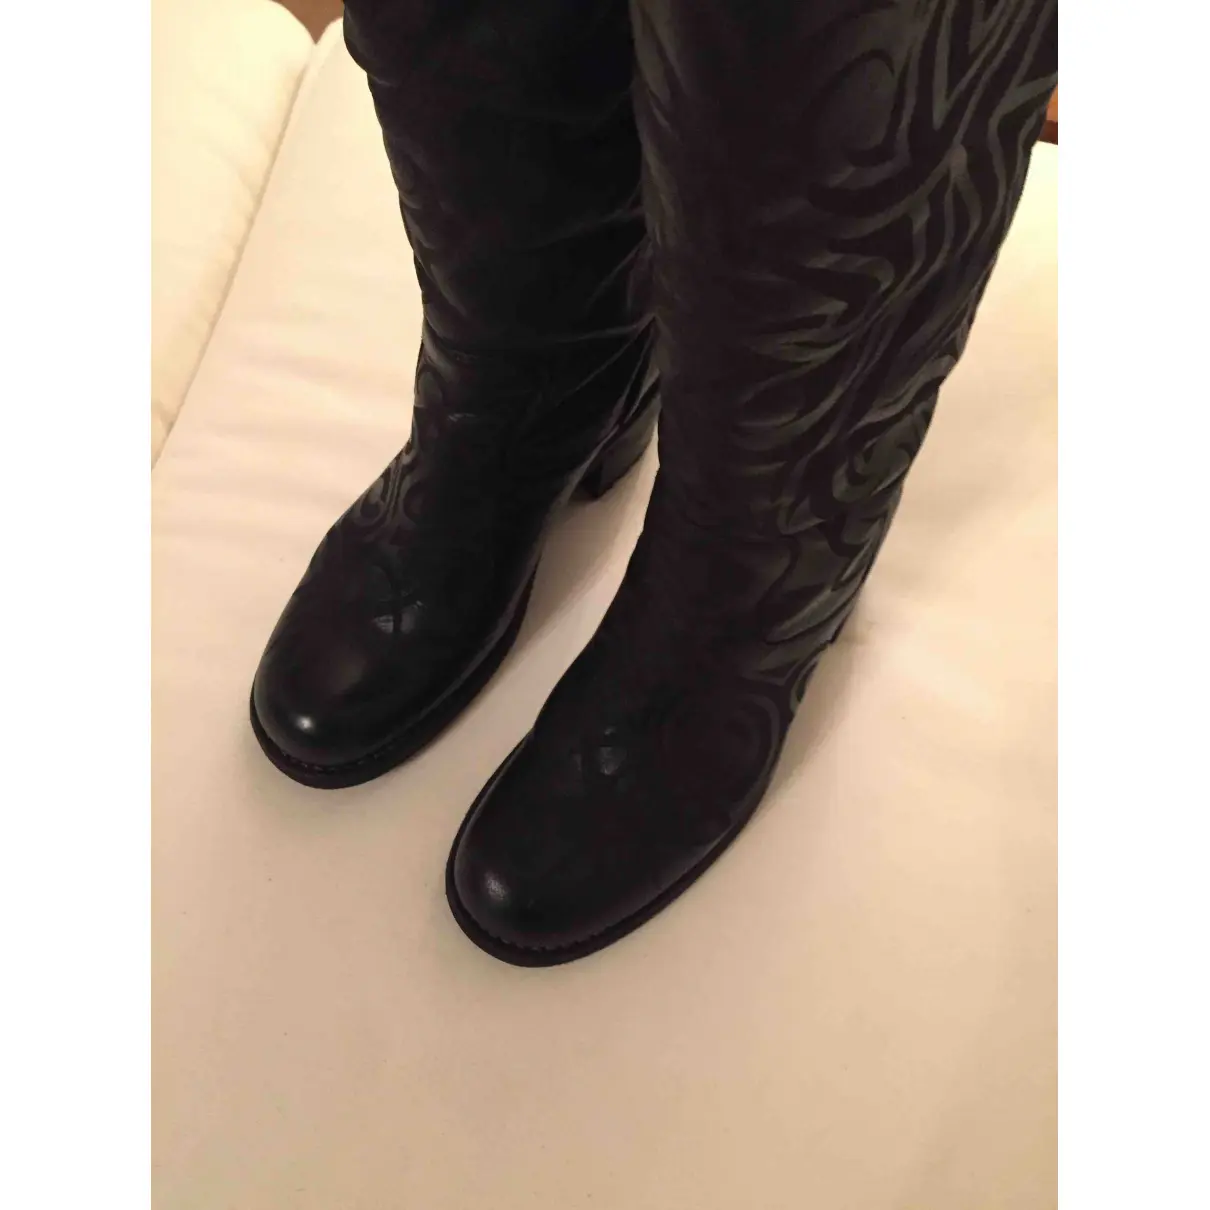 Geronimo leather boots Free Lance